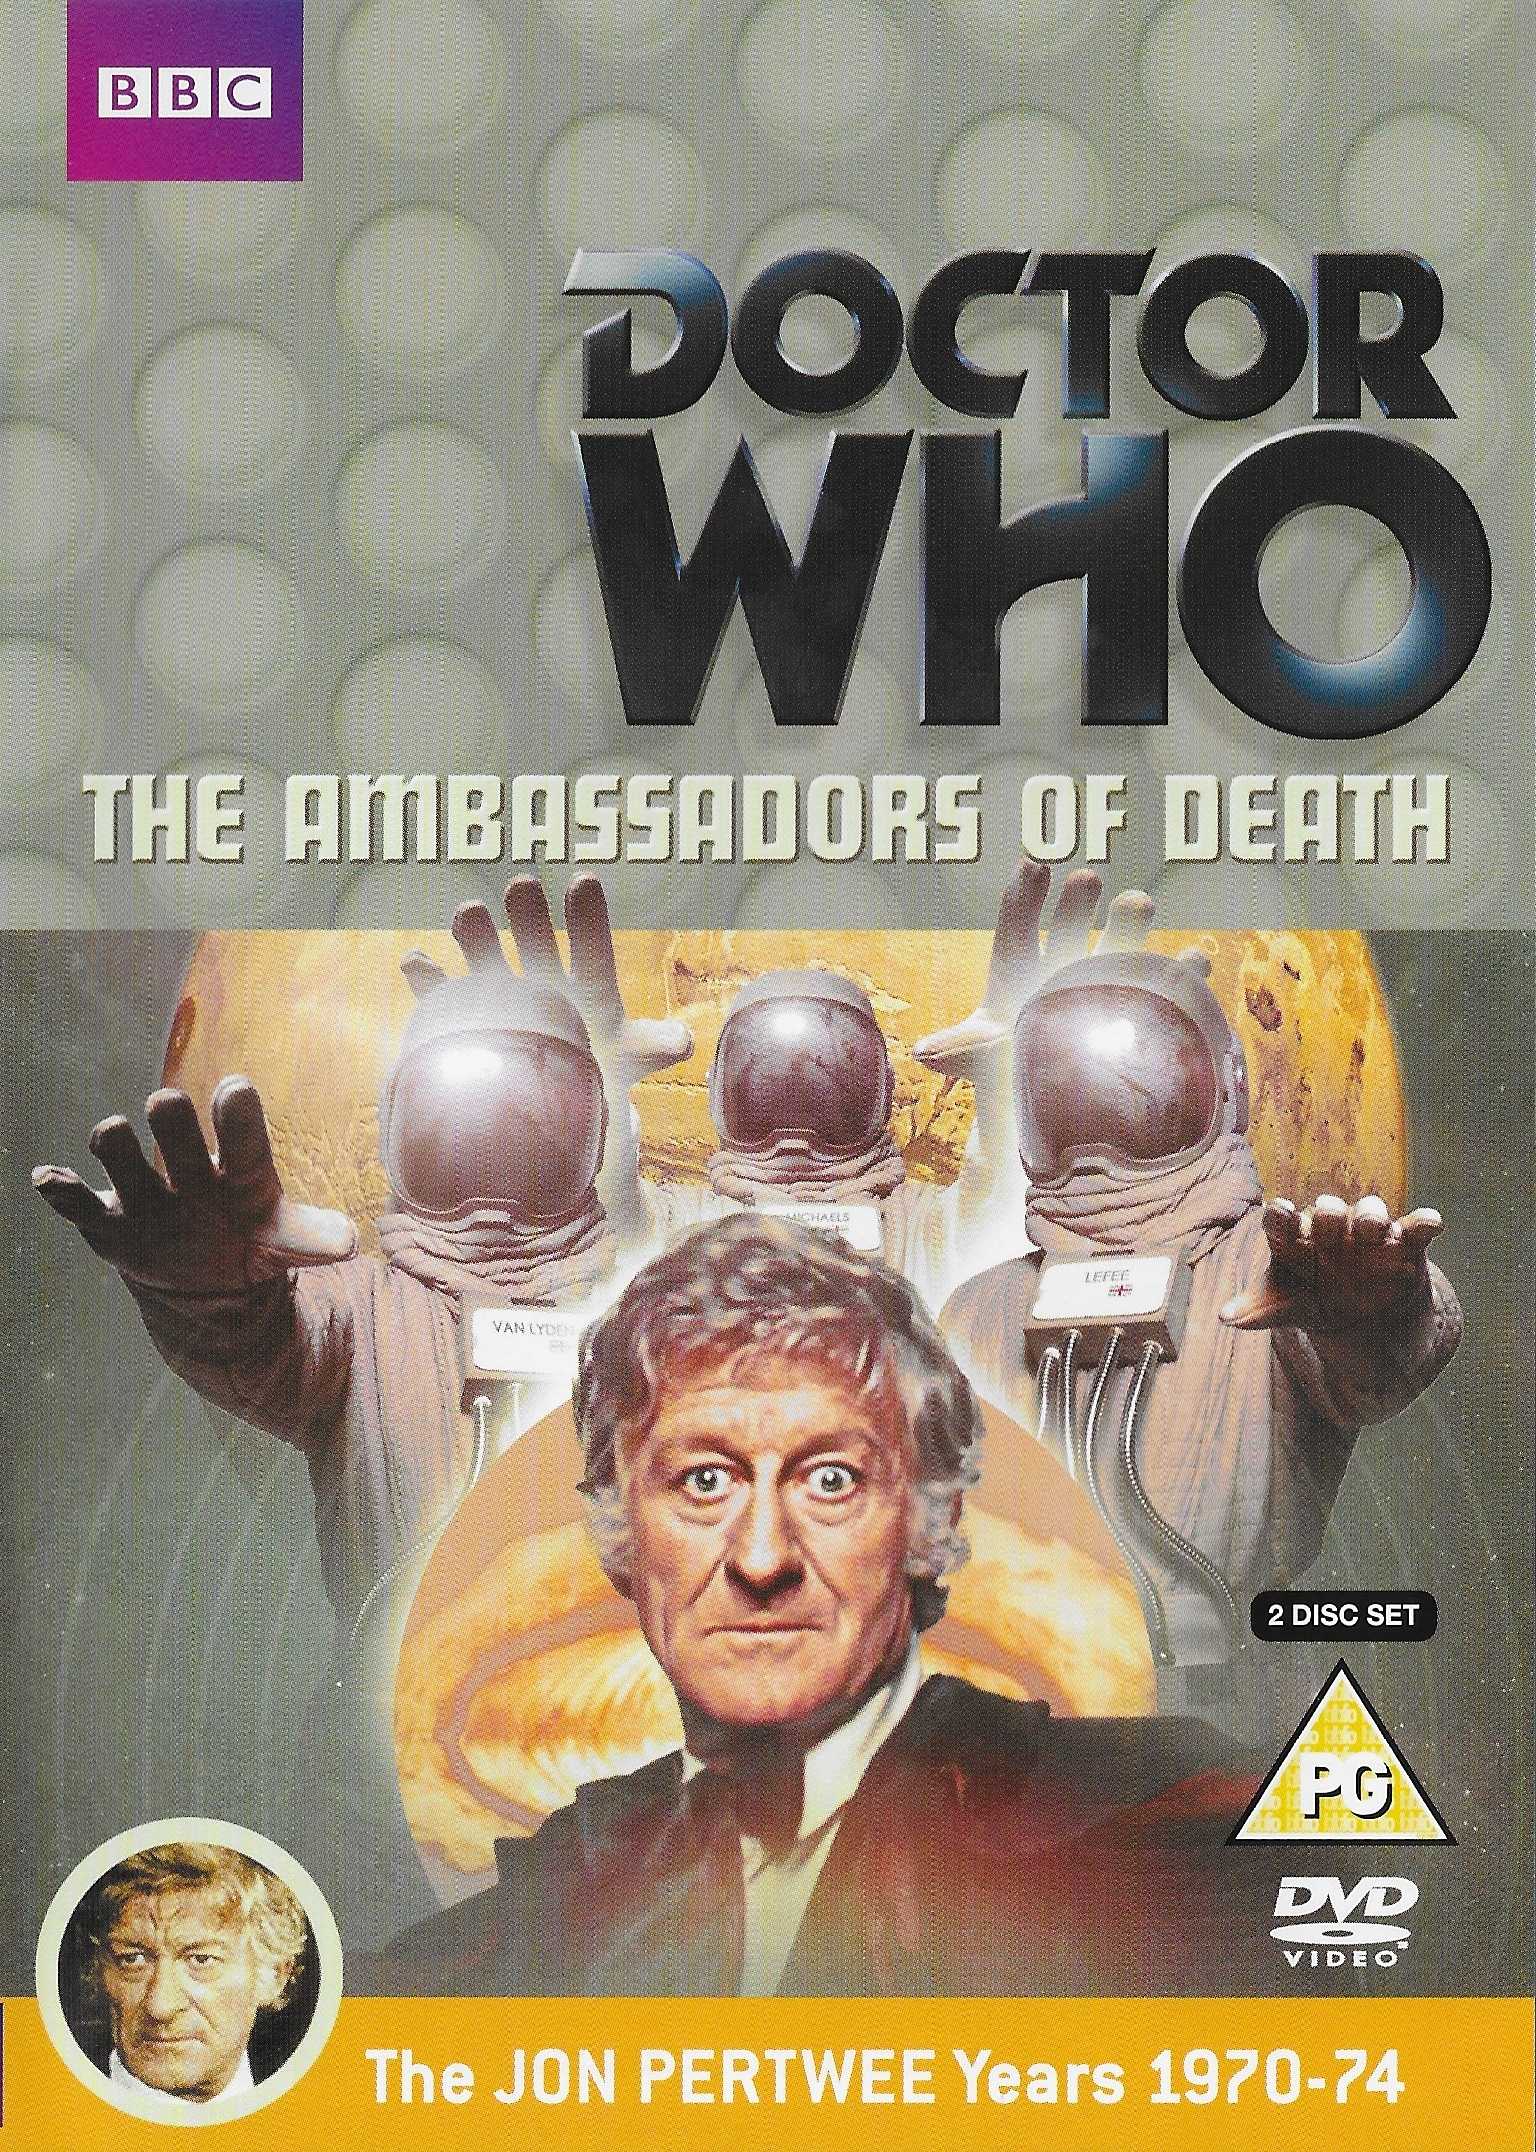 Picture of BBCDVD 3484 Doctor Who - The ambassadors of death by artist David Whitaker / Malcolm Hulke / Trevor Ray from the BBC records and Tapes library